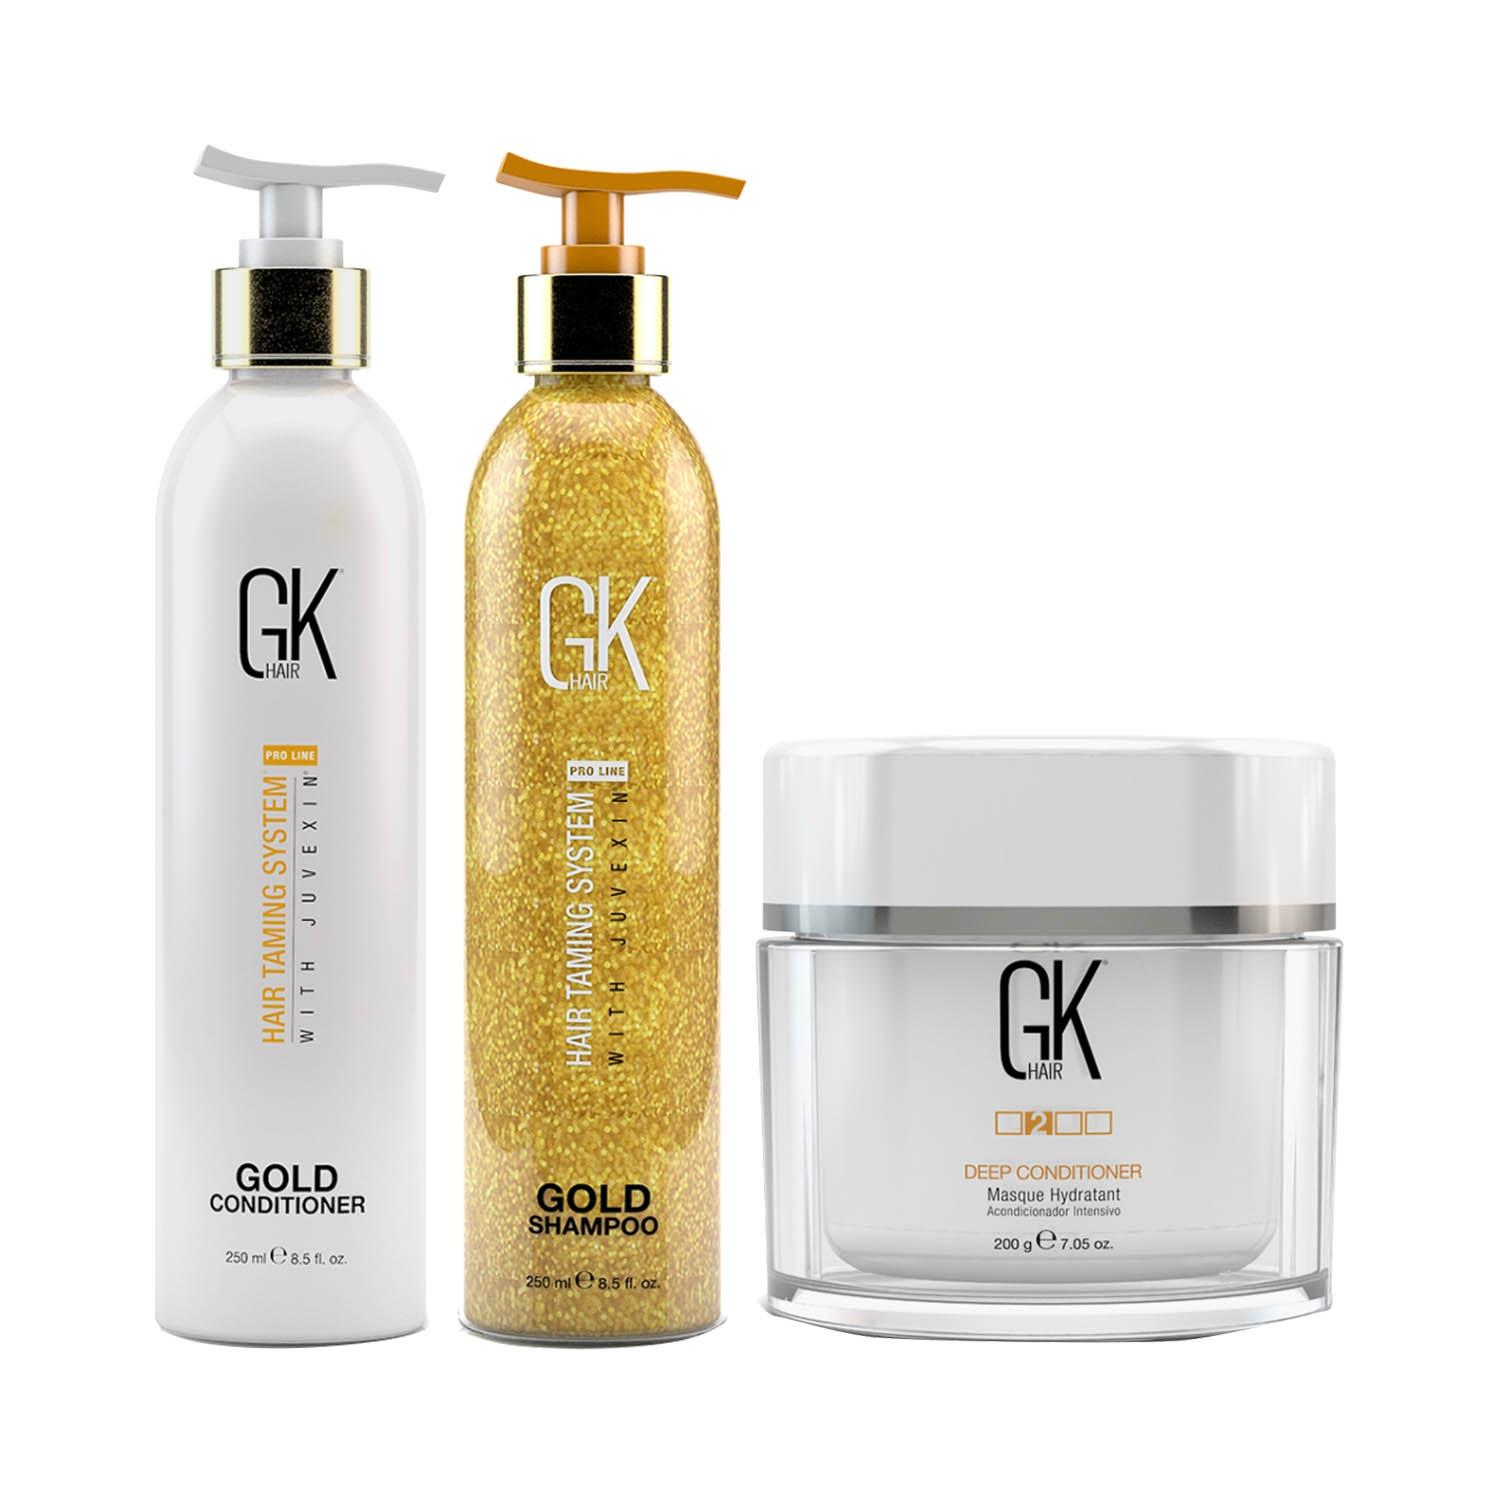 GK Hair | GK Hair Gold Shampoo and Conditioner 250ml with Deep Conditioner Masque 200gm